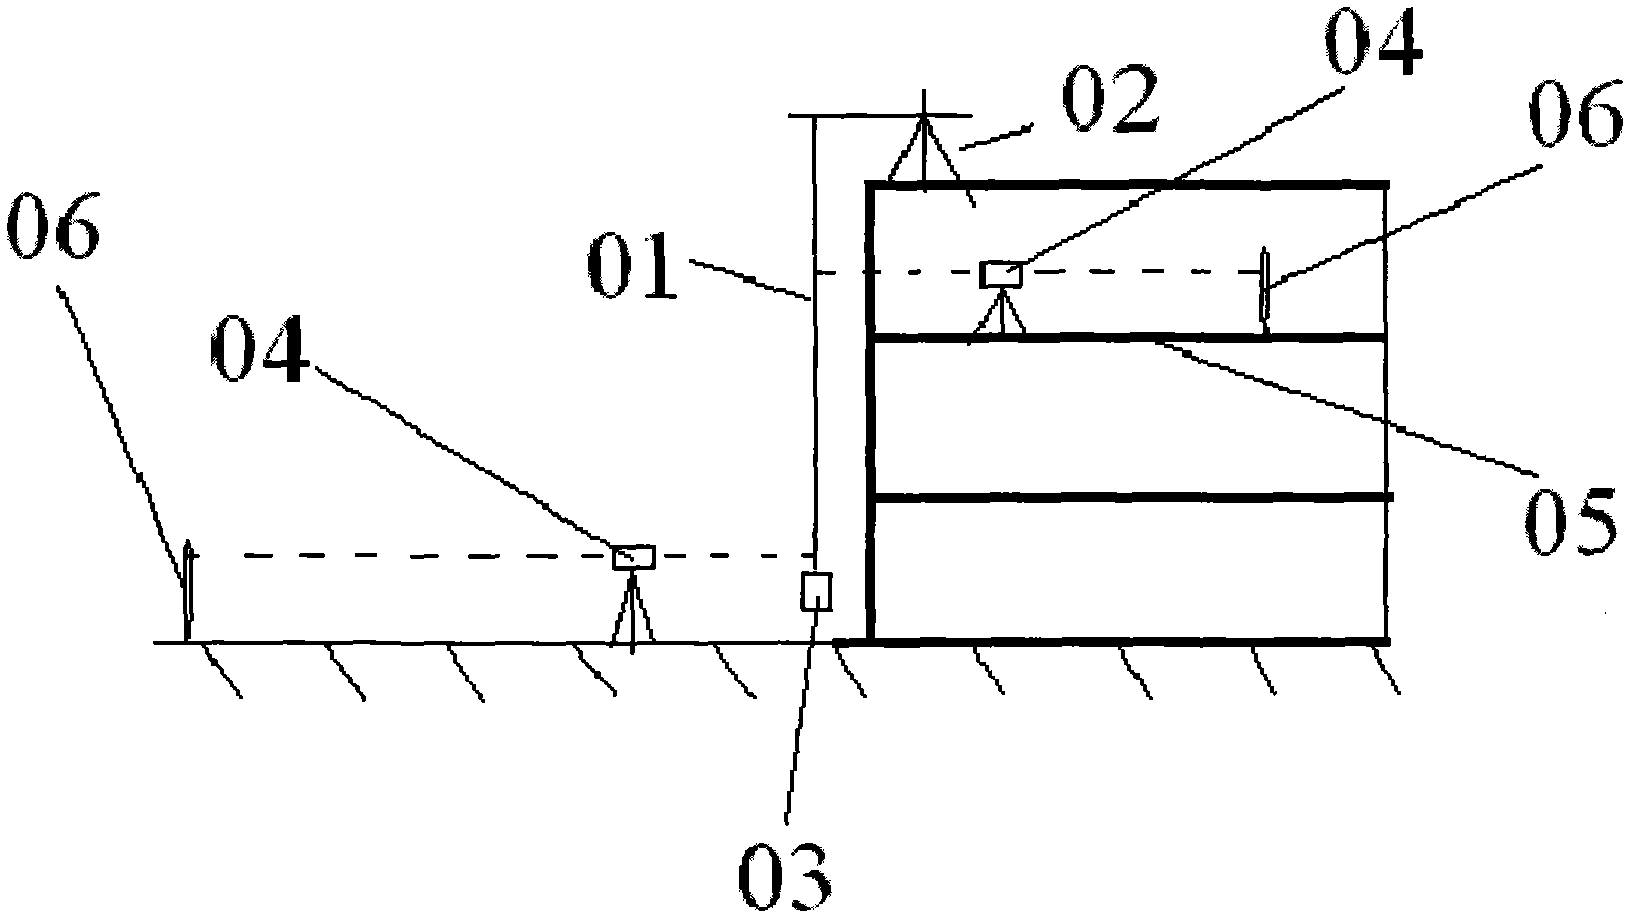 Method for measuring standard elevation in nuclear power engineering